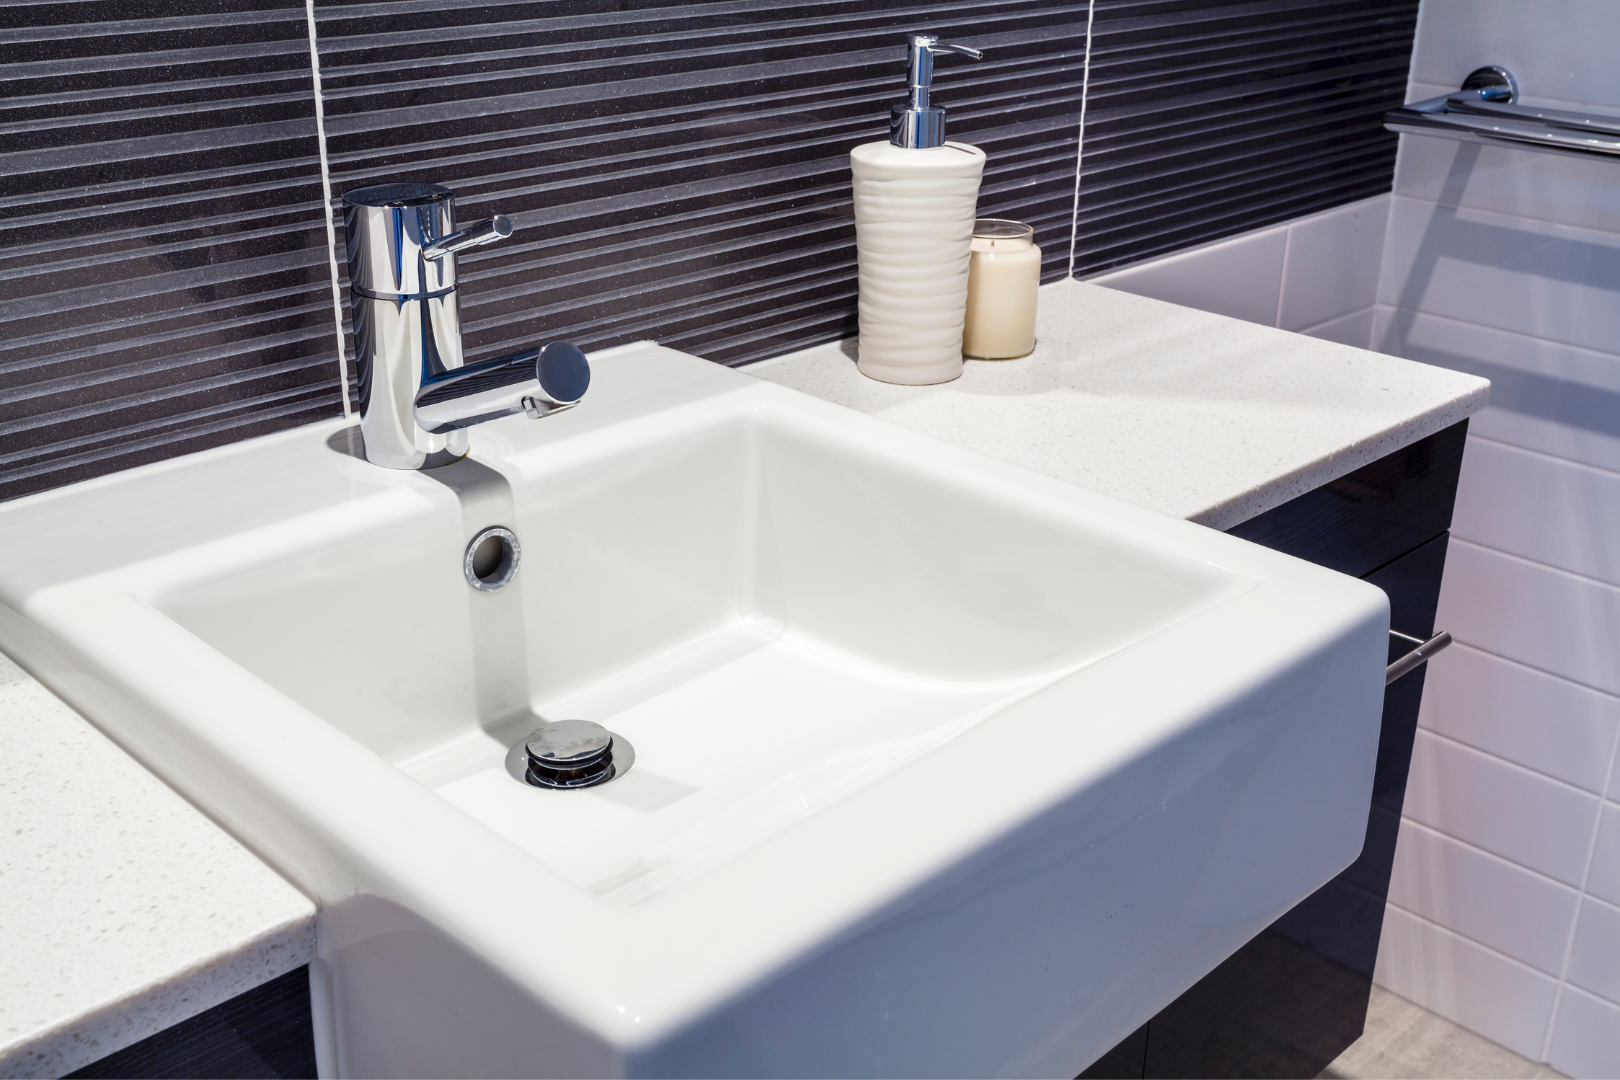 Drop-in sink to install in your bathroom